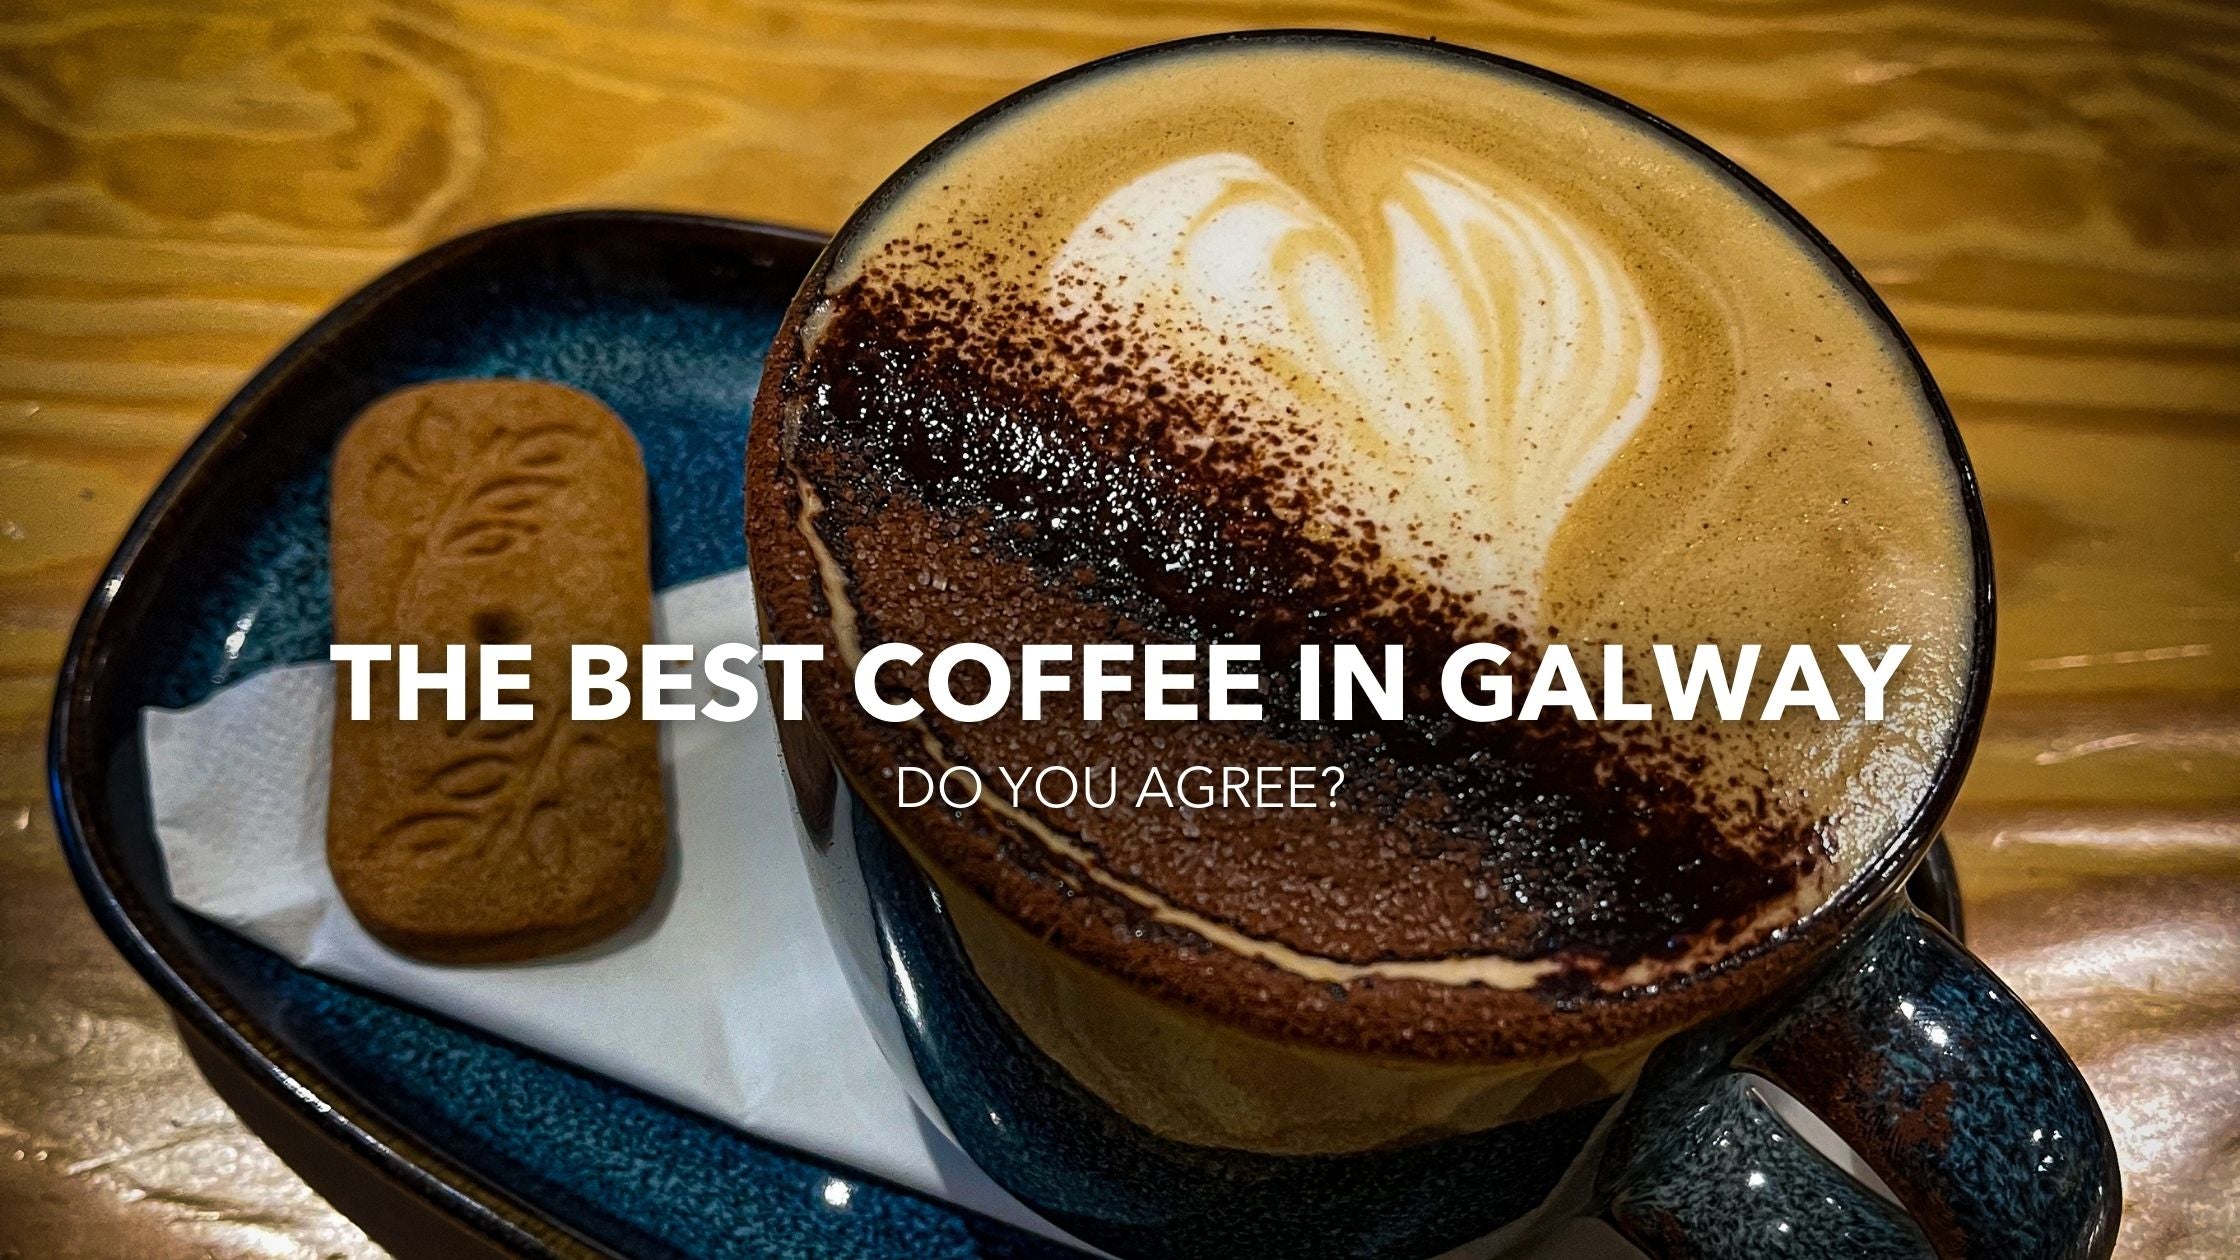 The Best Coffee in Galway